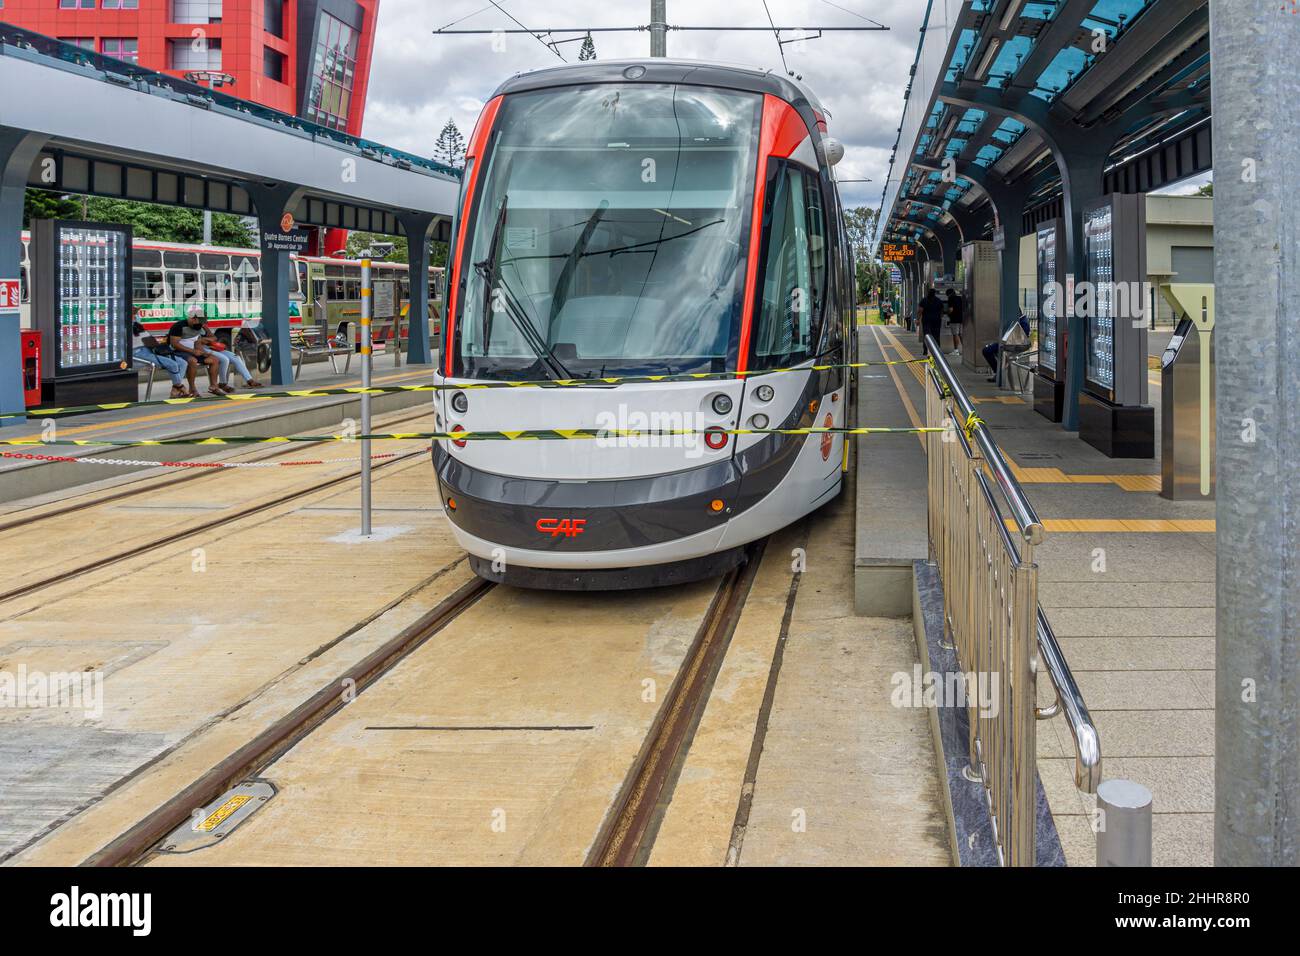 Mauritius, December 2021 - New rail platform and modern light rail train. Mauritius just had its light rail system about over one year ago. Stock Photo